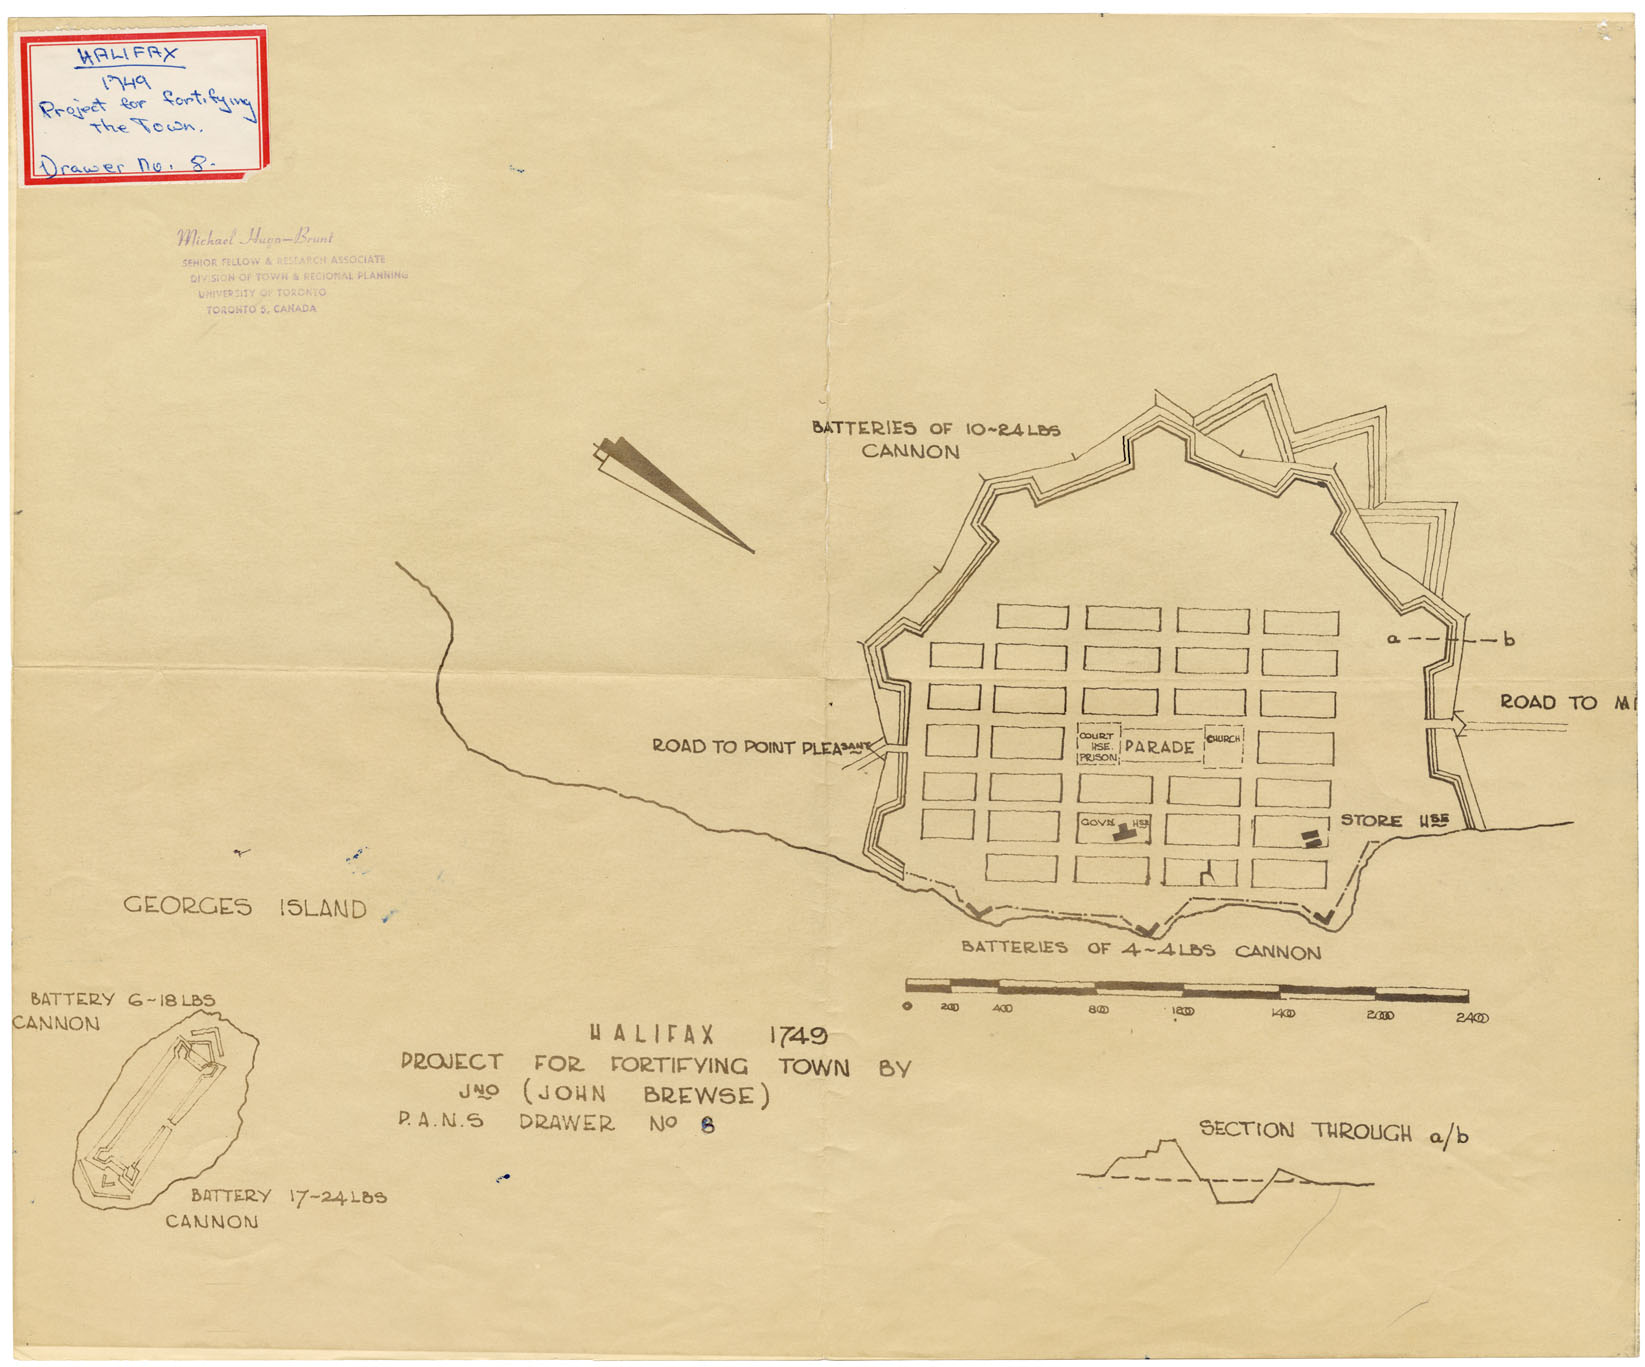 Project for Fortifying the Town of Halifax in N.S. 1749